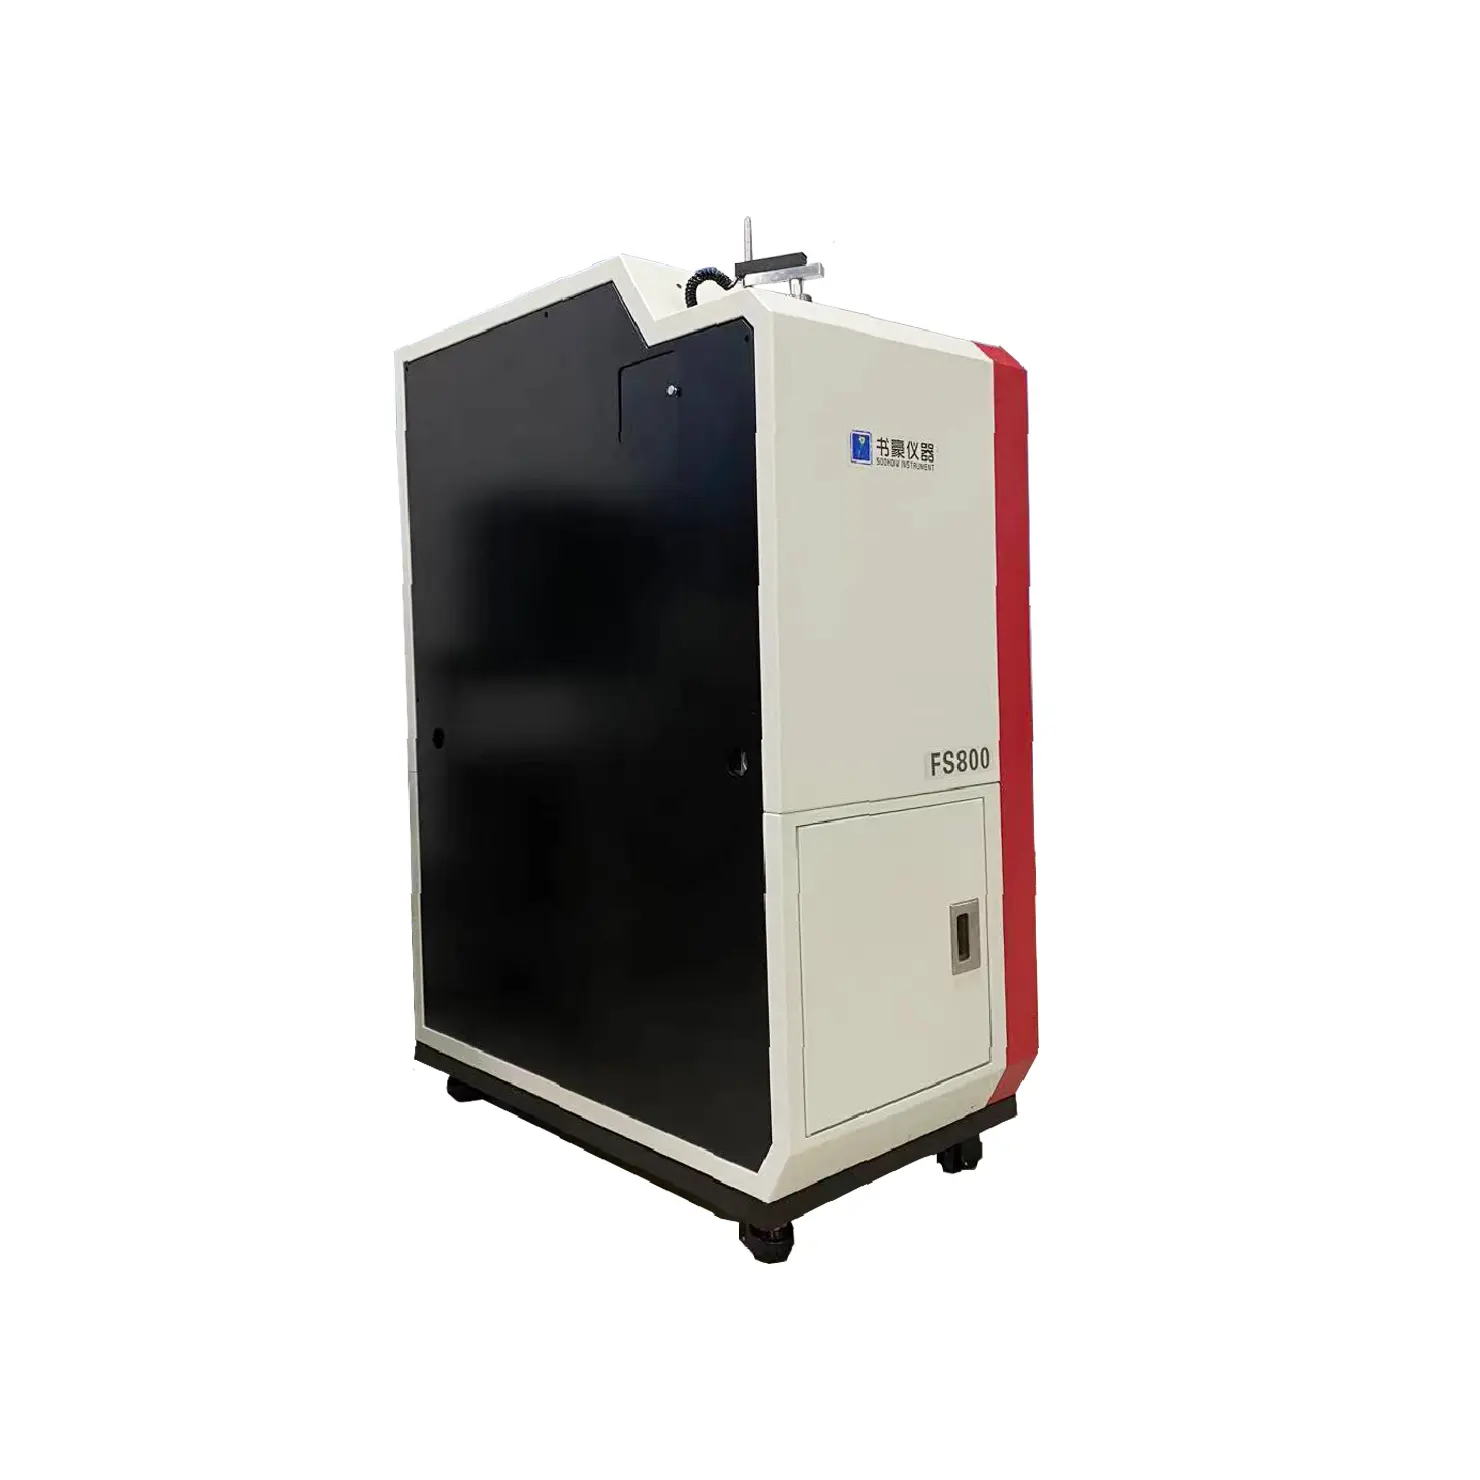 High Precision and Stability Element Analyzer FS800 Optical Emission Spectrometry (OES)